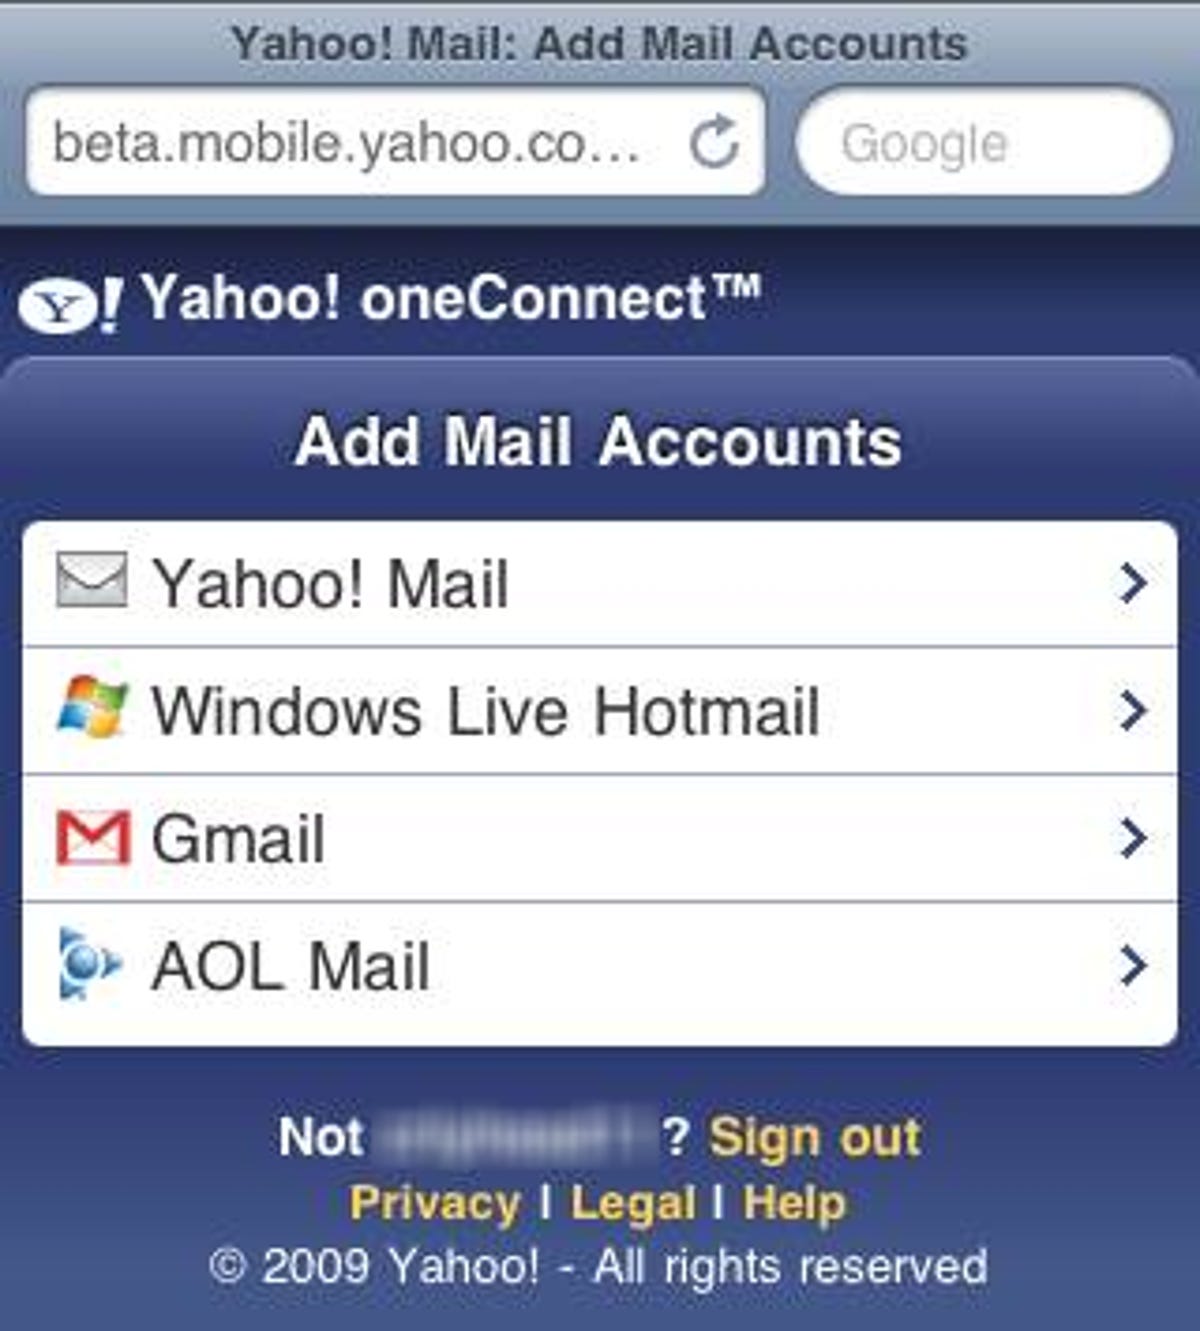 YahooMobile_OneConnect.png